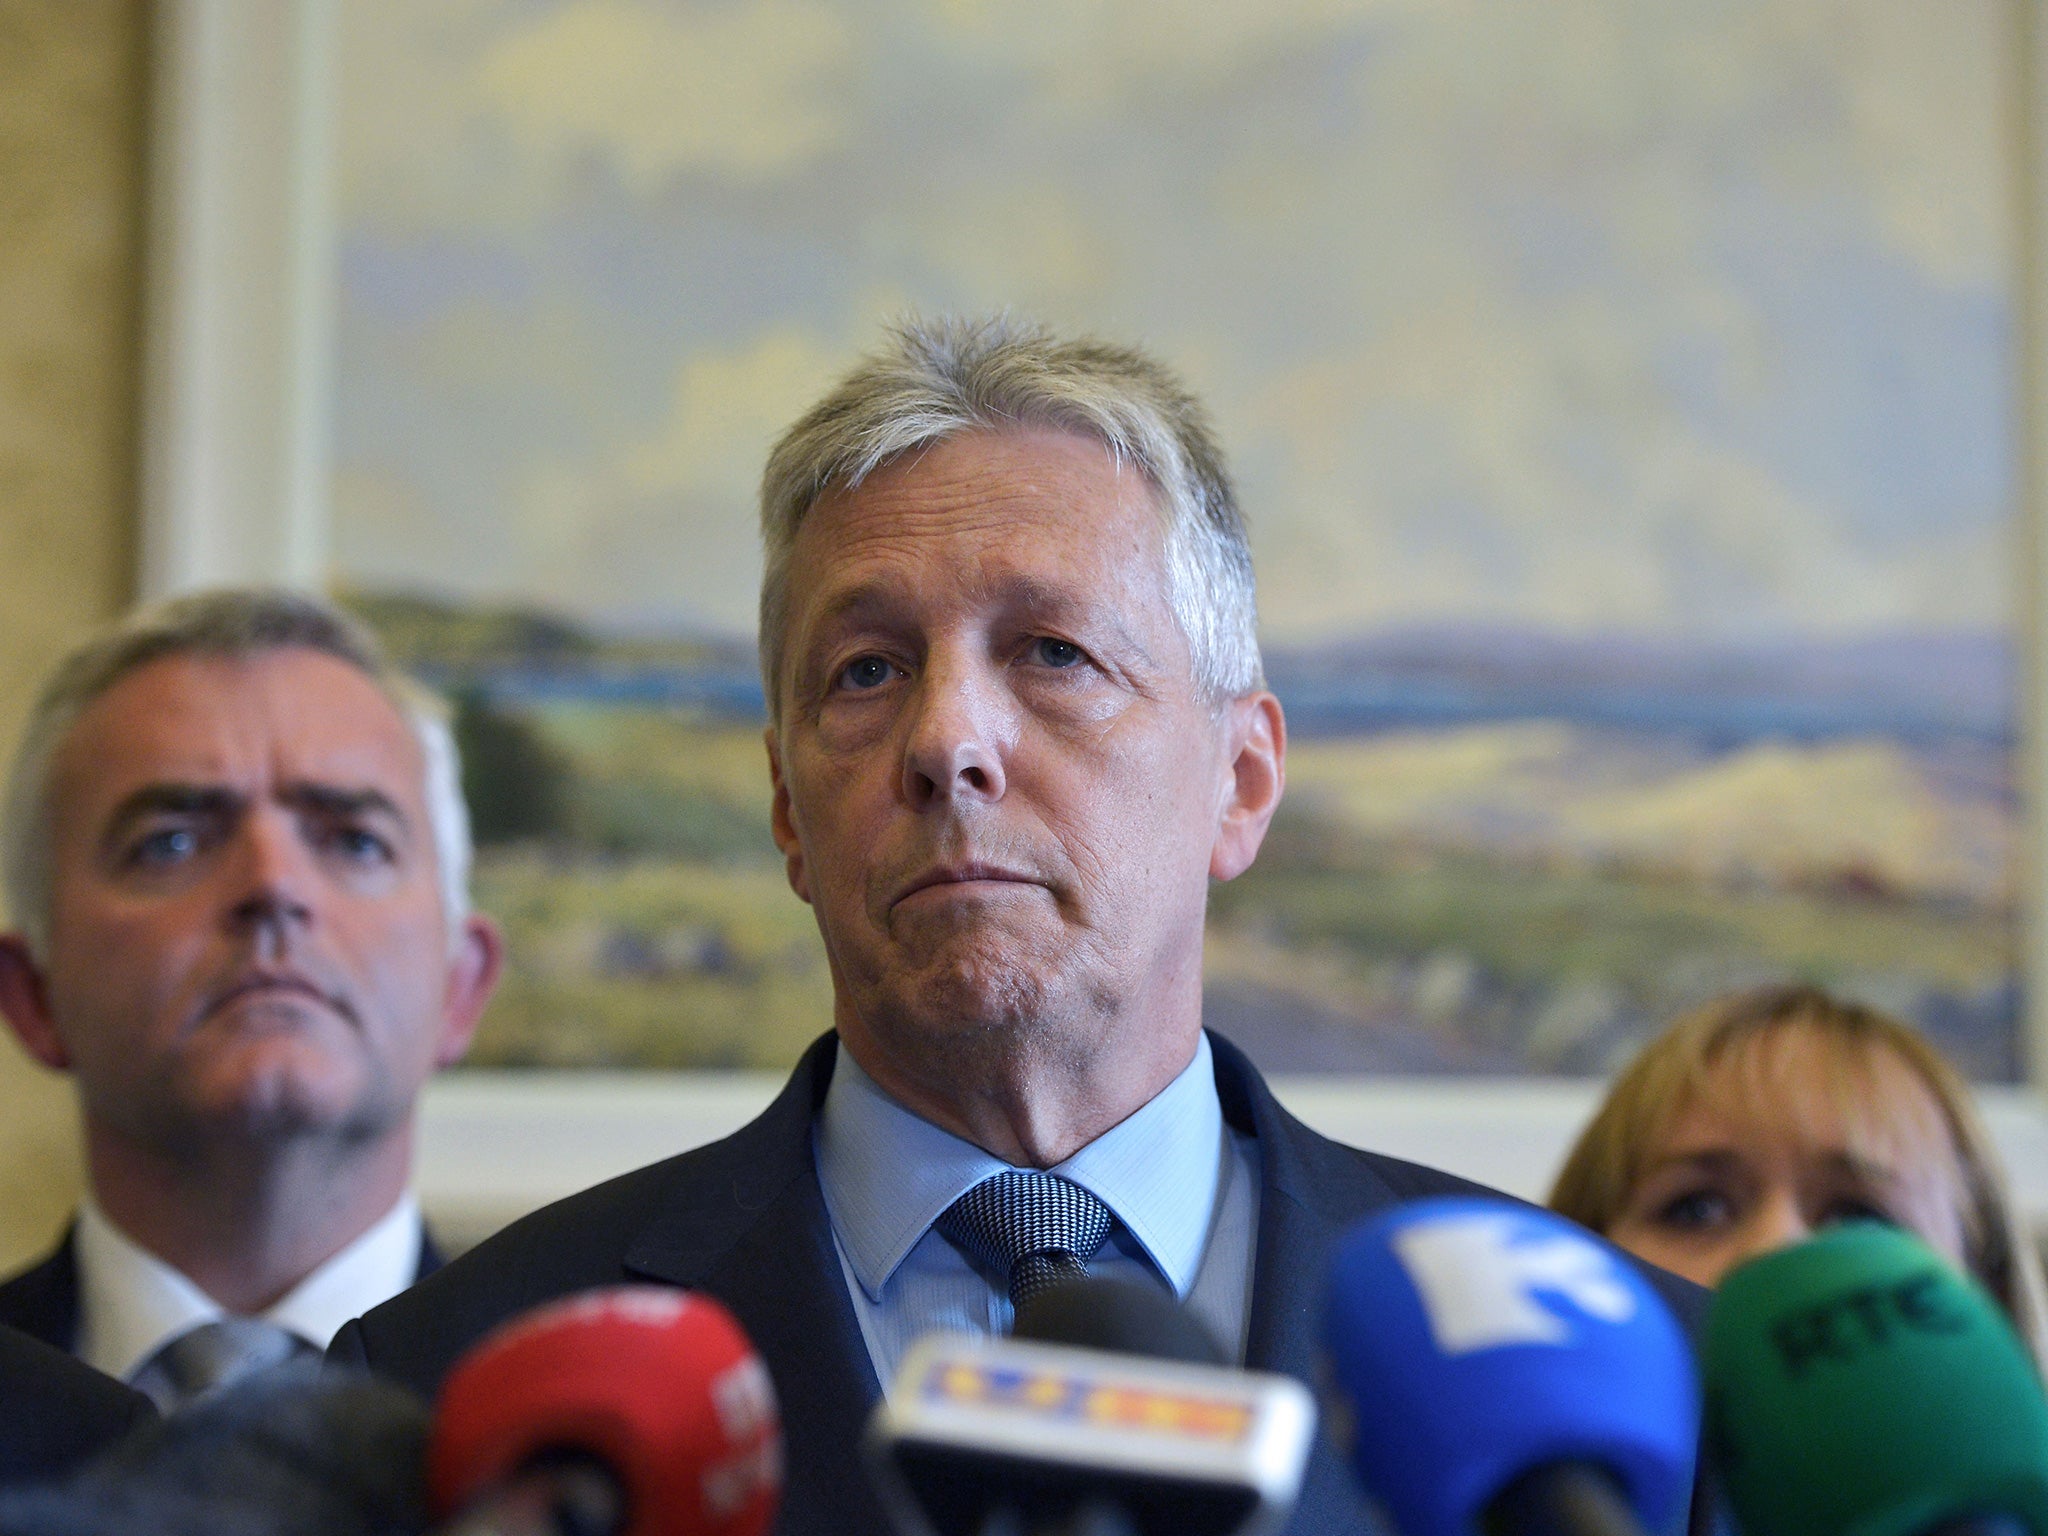 Peter Robinson reacts to questions as he held a press conference announcing he would step down as First Minister